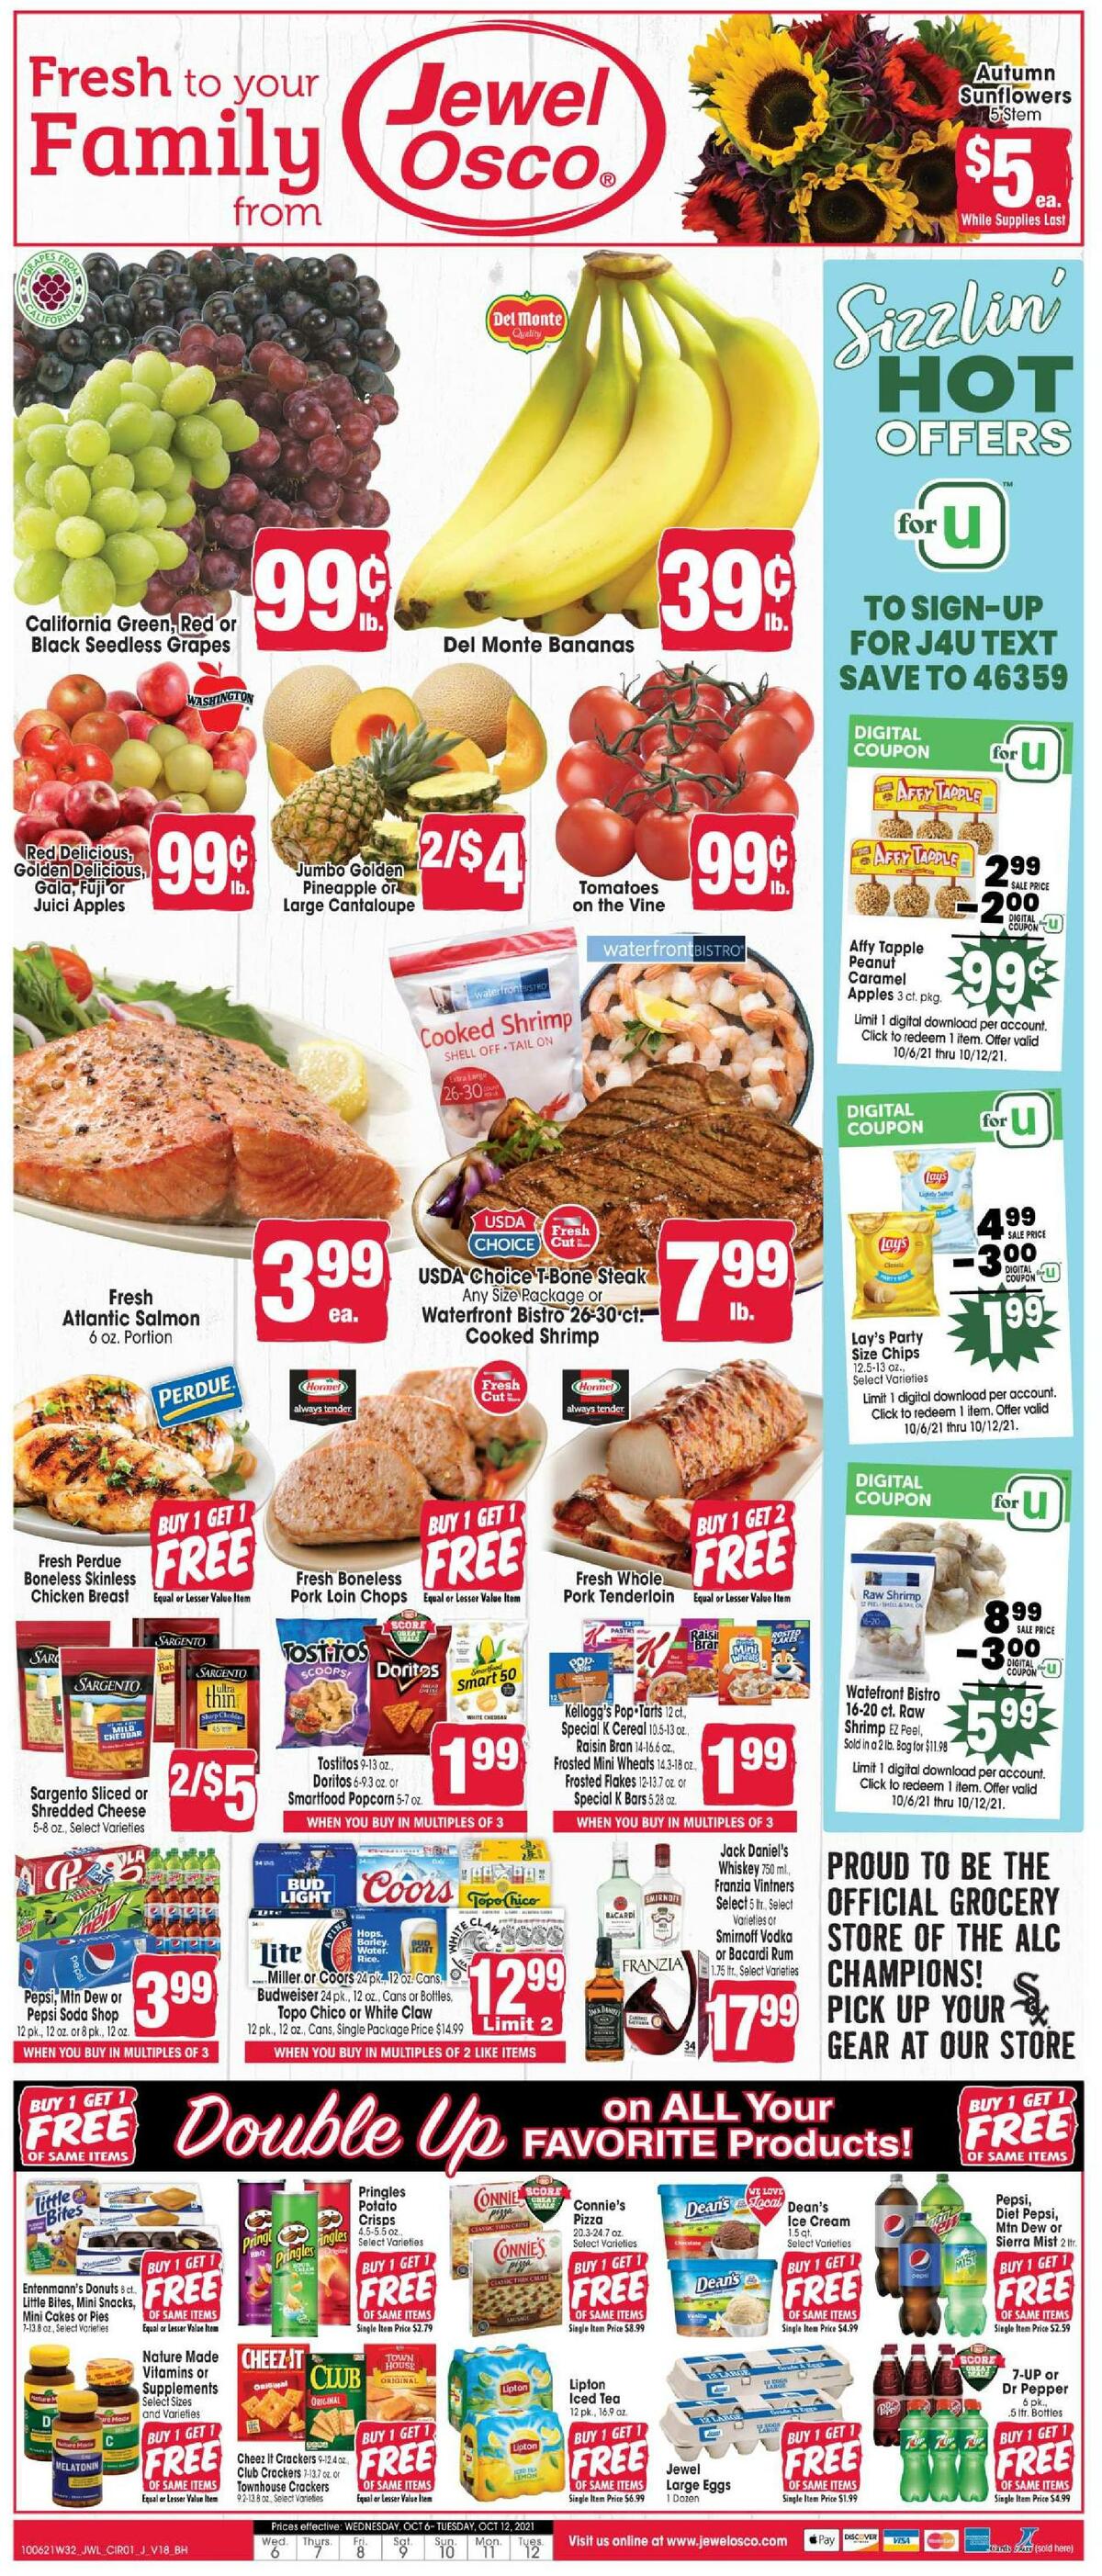 Jewel Osco Weekly Ad from October 6